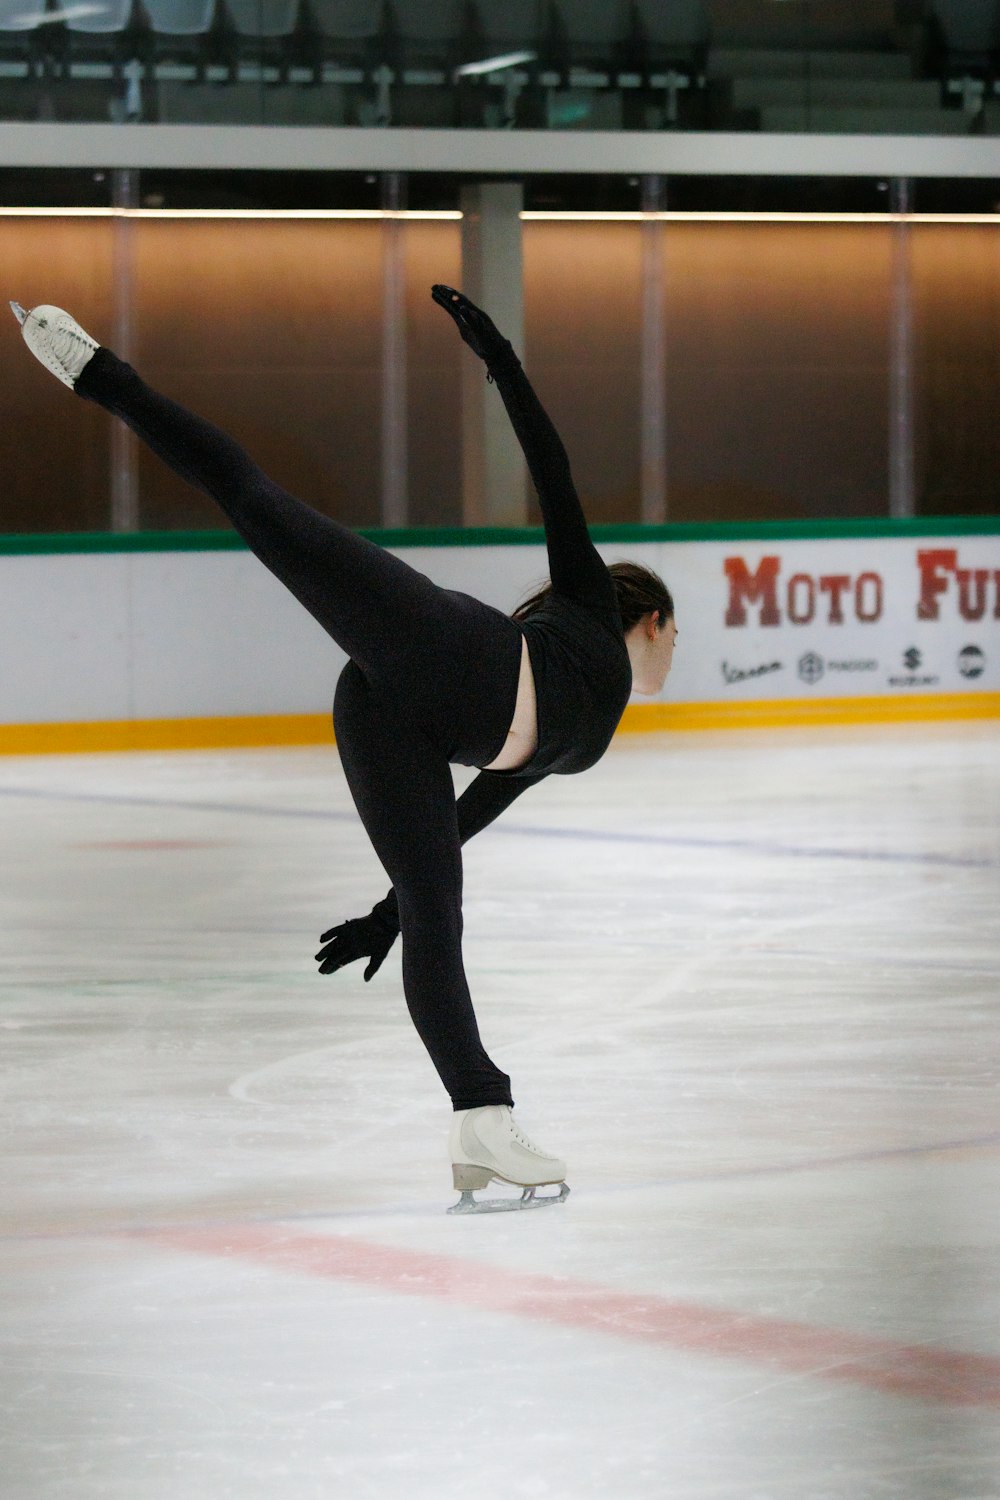 a person doing a handstand on an ice rink